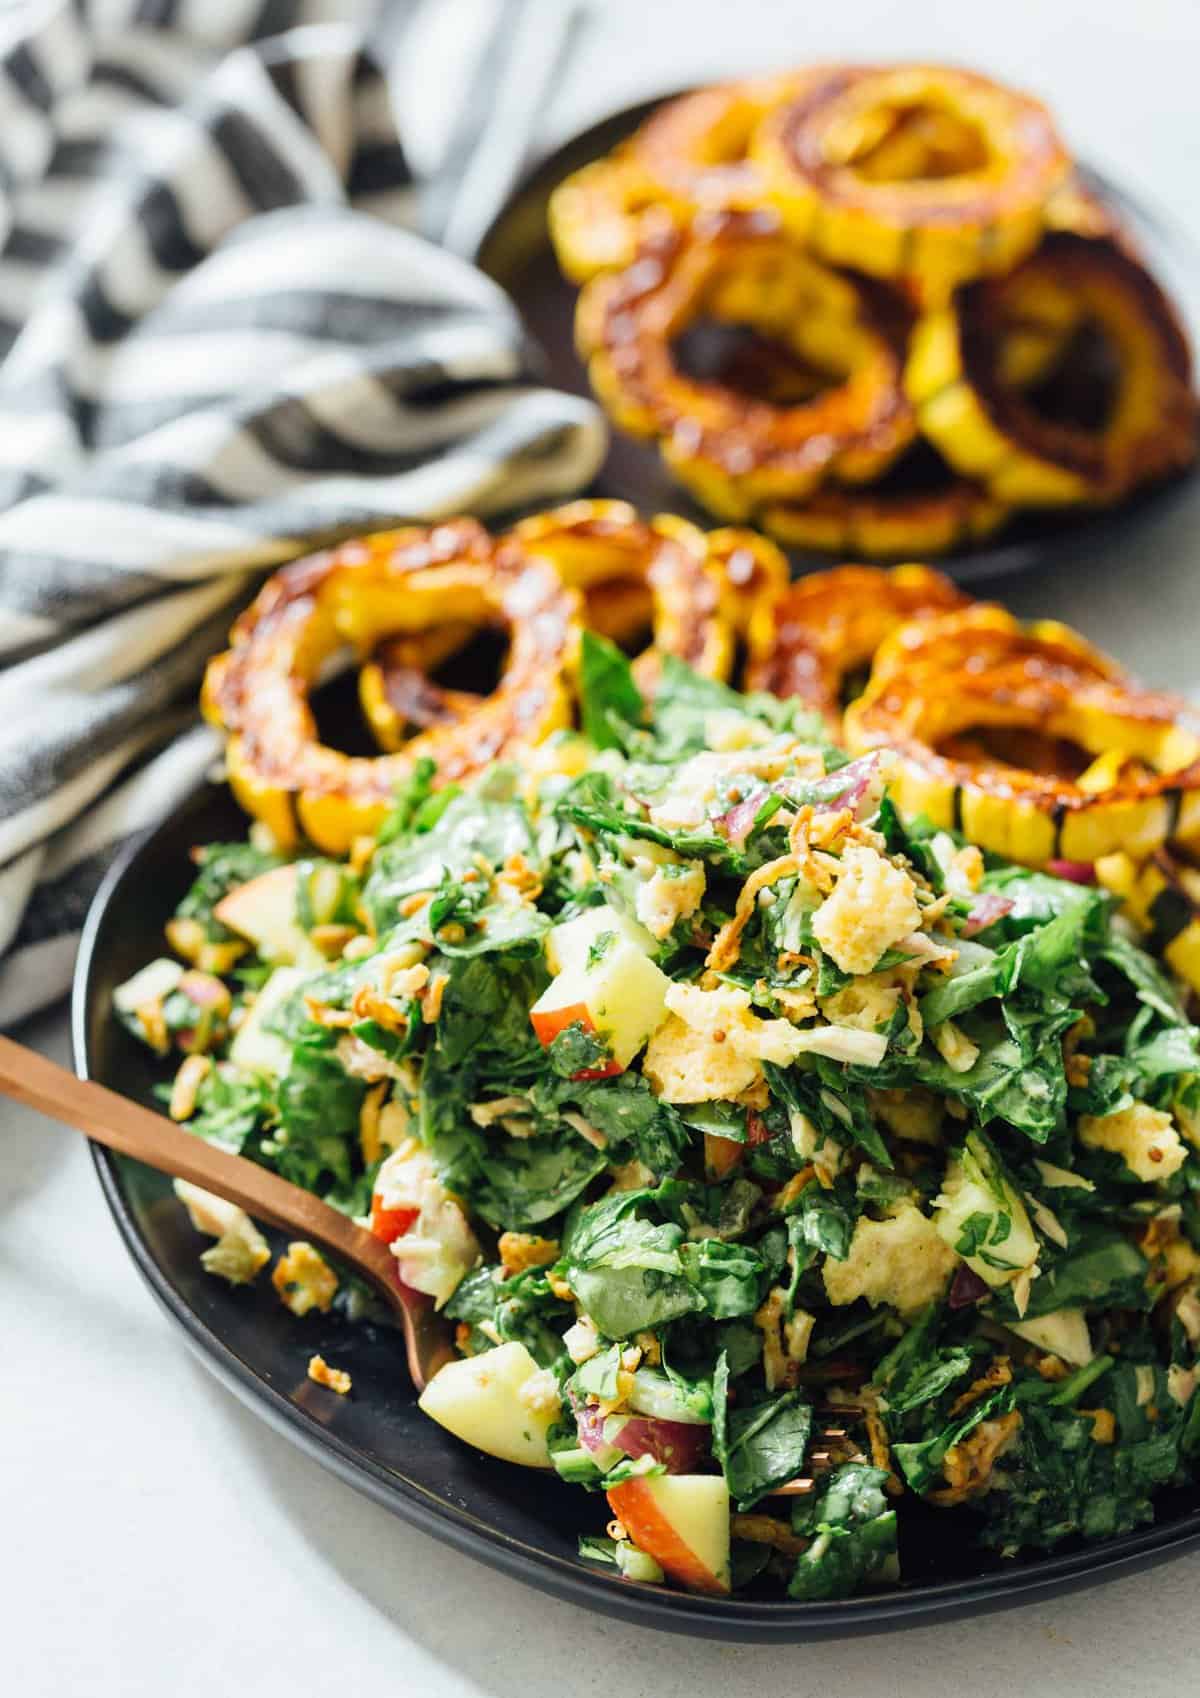 A spinach tuna salad topped with roasted delicata squash is a heavenly combination! The delicata squash gives it a unique yet distinct sweetness but it also adds volume to make this salad hearty and filling!